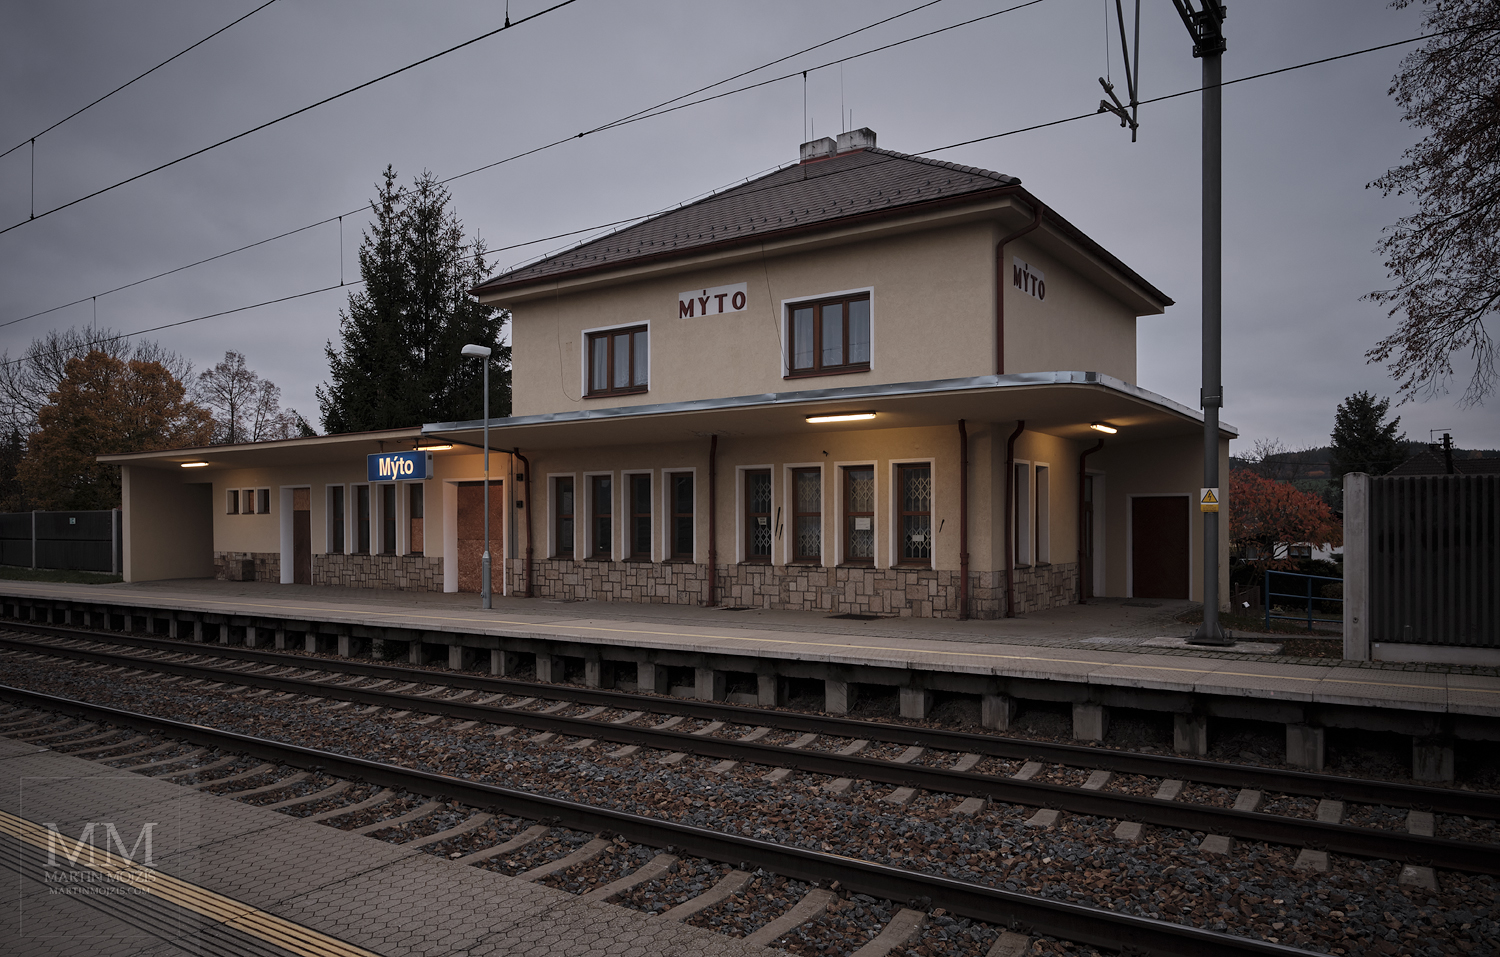 Photographic report from railway station Myto by Martin Mojzis.